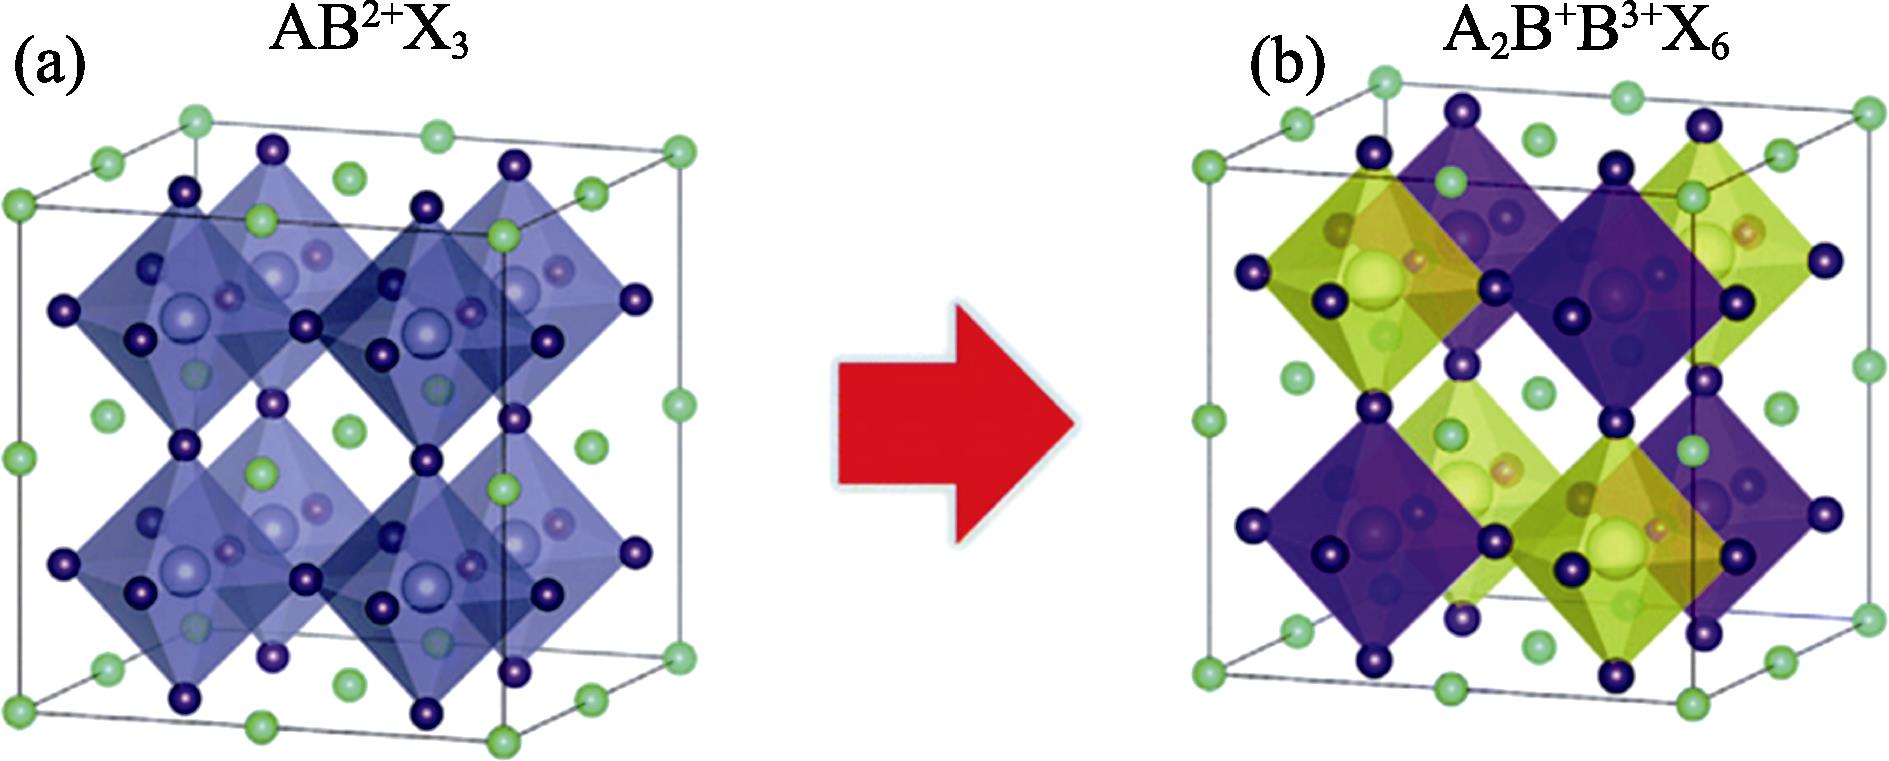 (a) Crystal structure diagrams of perovskite ABX3 and (b) double perovskite A2B+B3+X6[30]